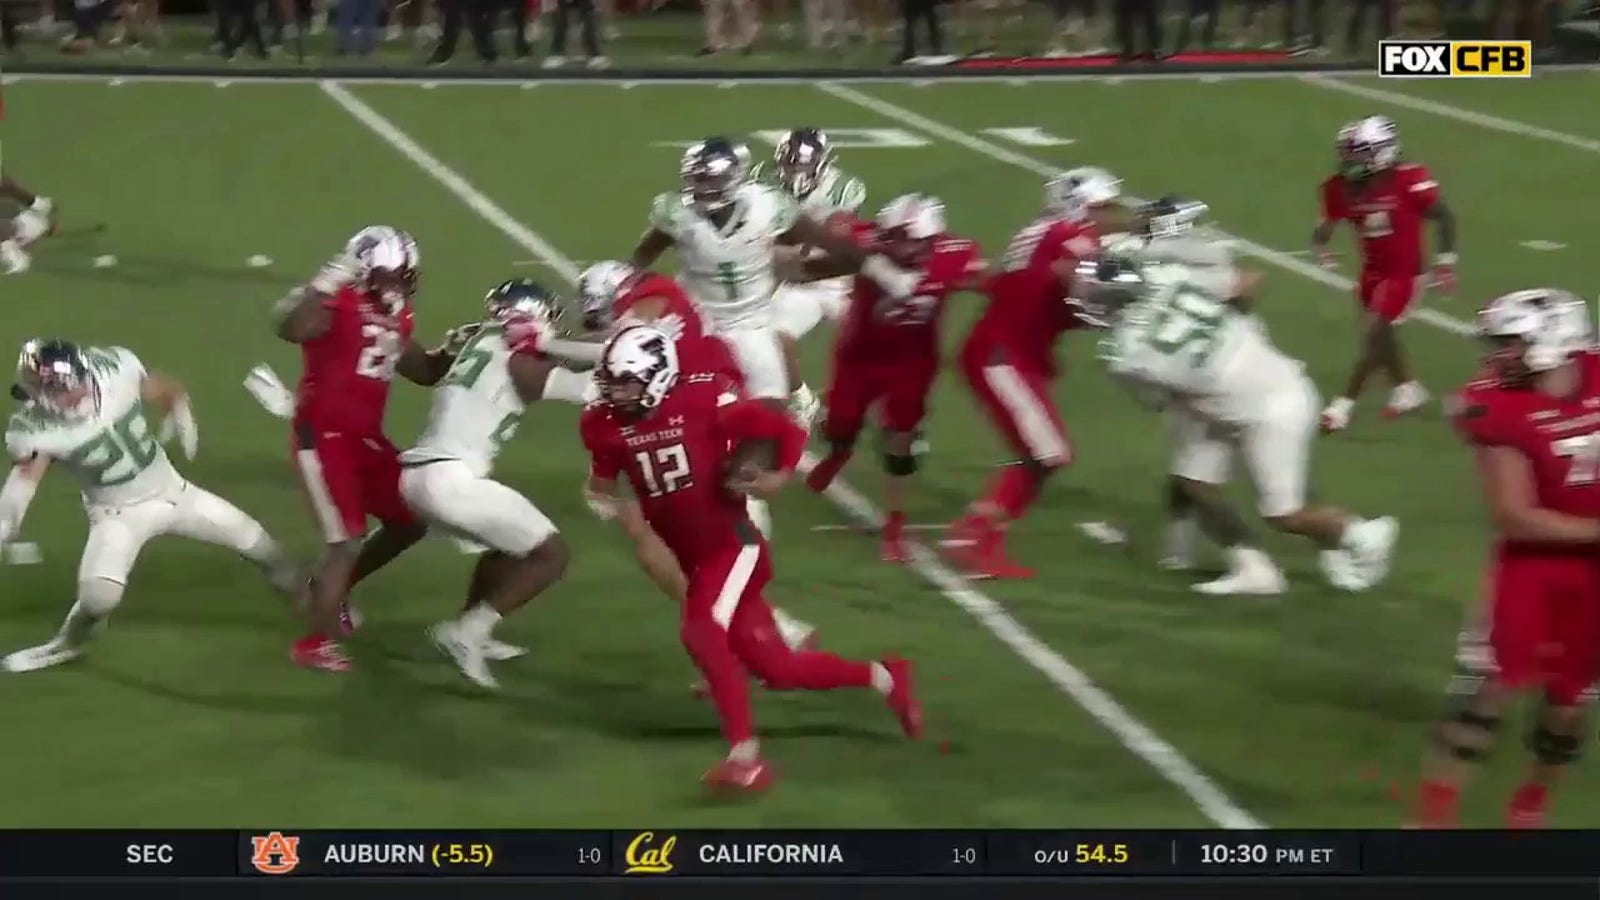 Tyler Shough rushes for a 5-yard TD to give Texas Tech a lead over Oregon